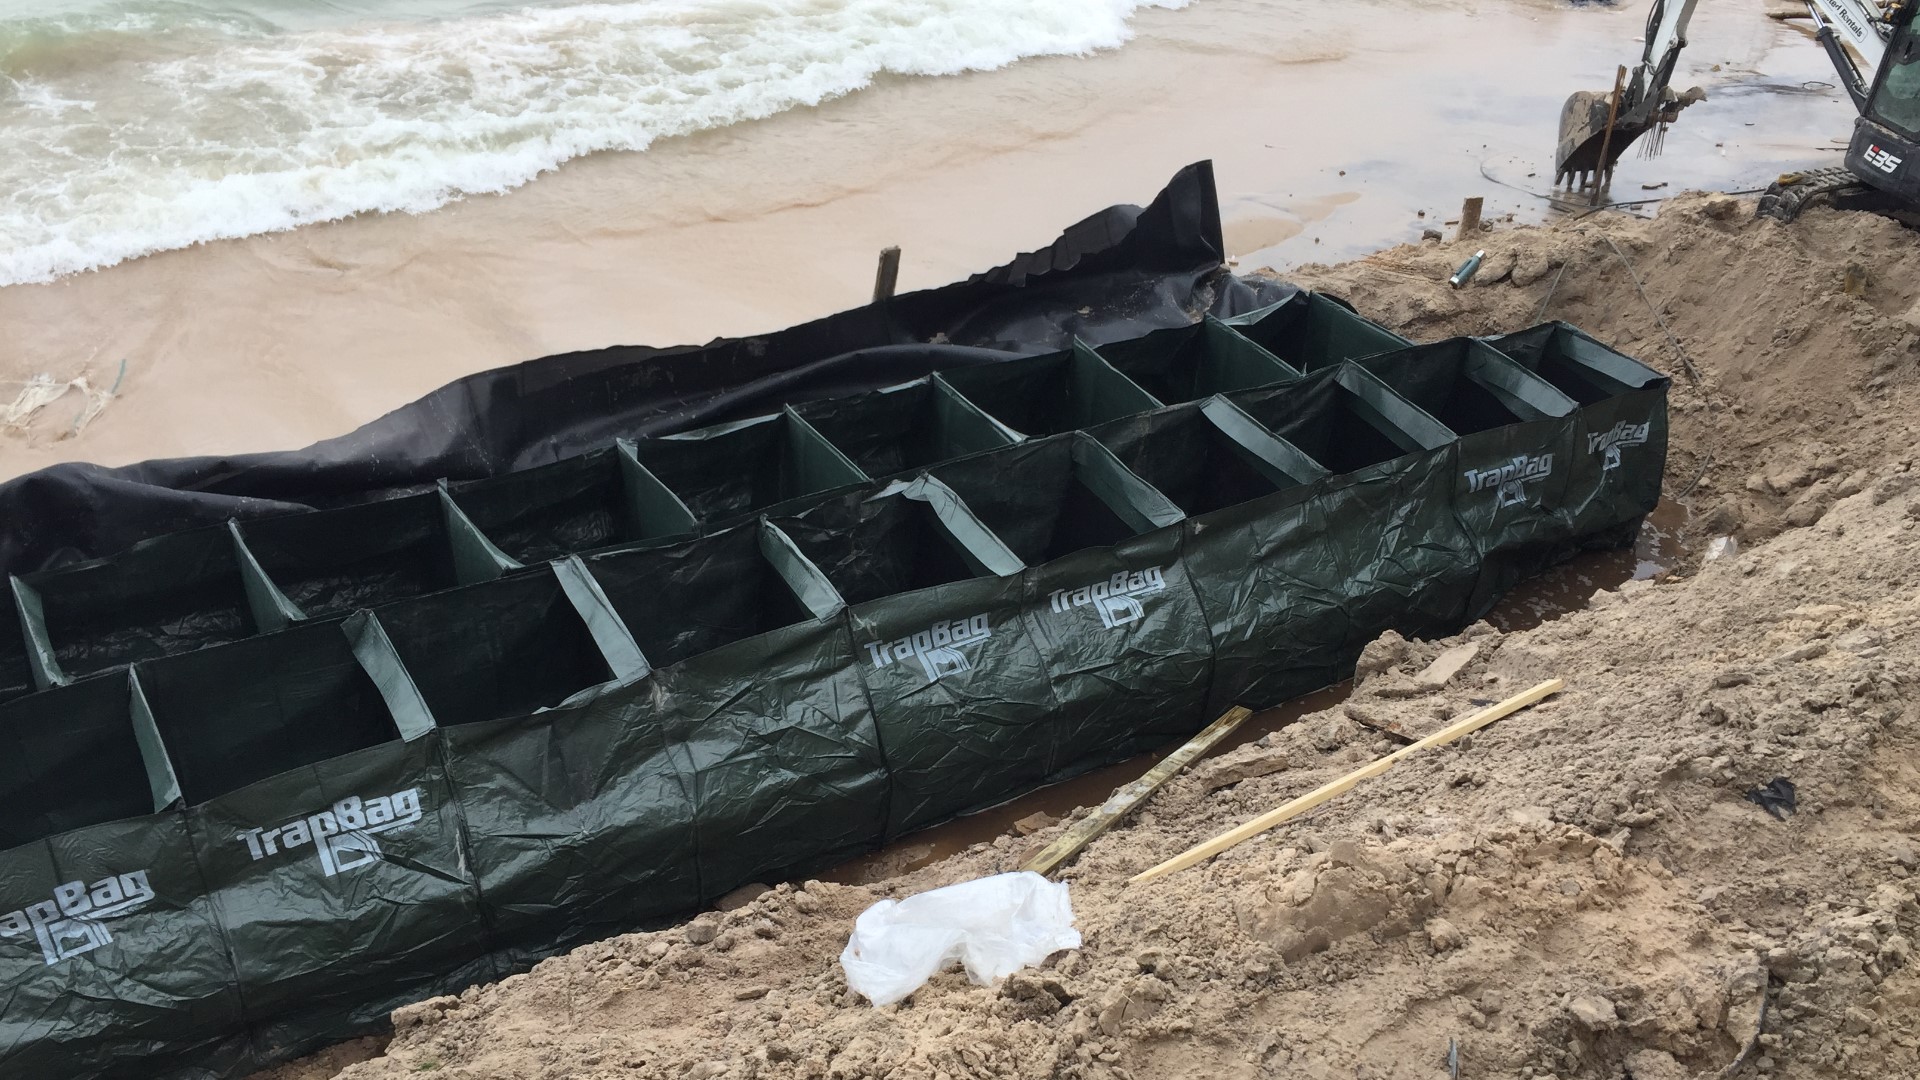 Beach erosion along Lake Michigan continues to threaten many West Michigan homes. Tuesday, lawmakers will discuss legislation aimed at protecting them.